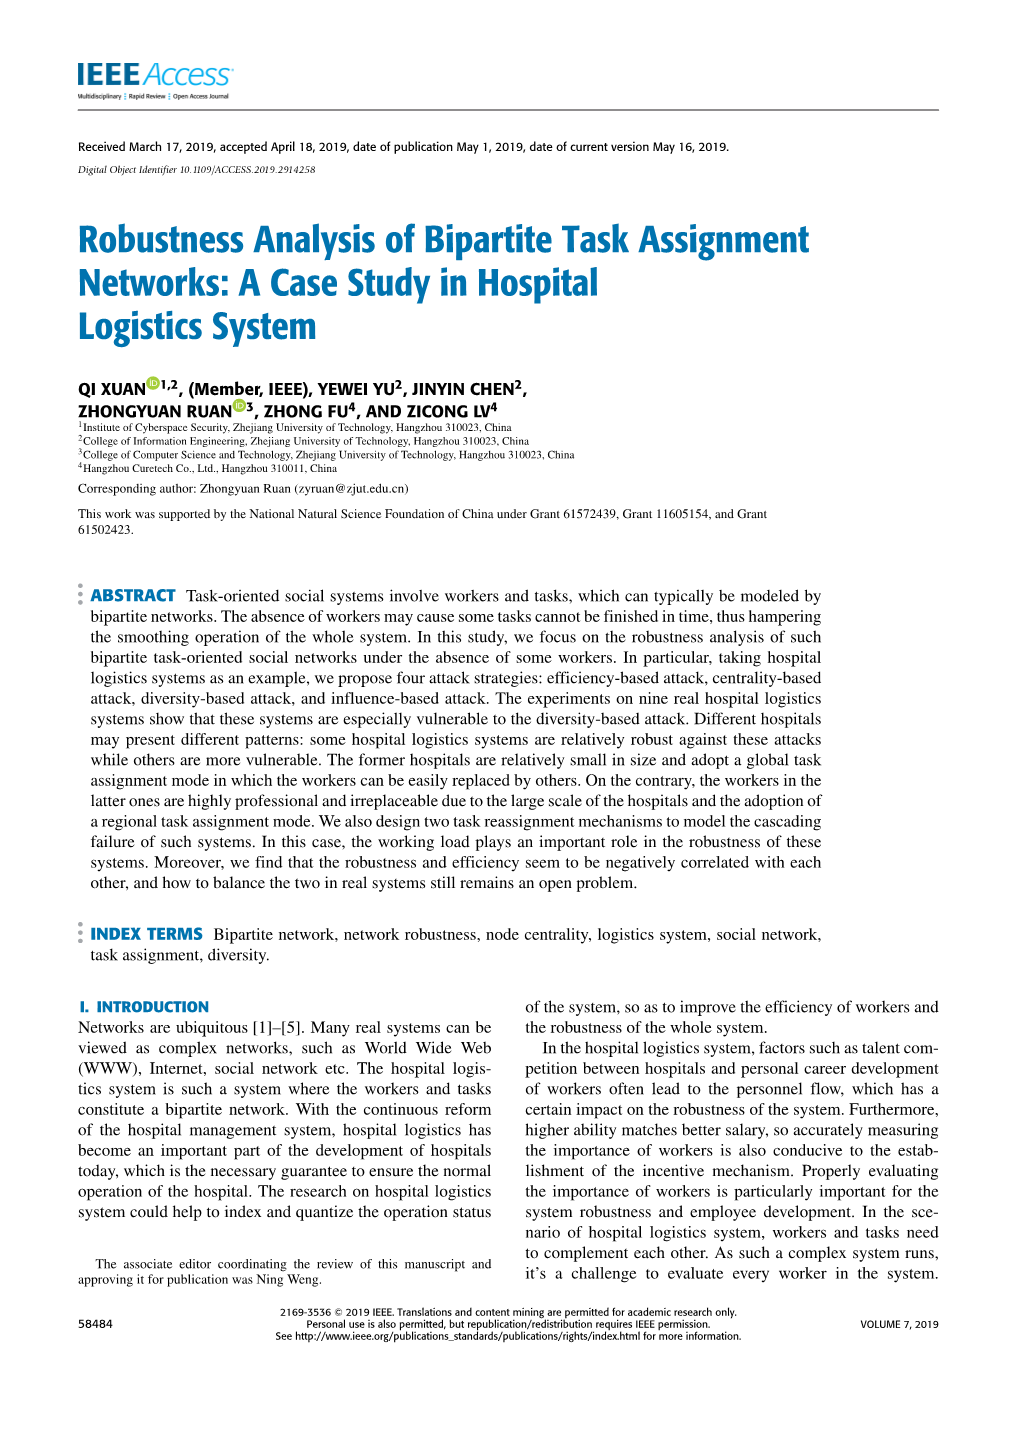 Robustness Analysis of Bipartite Task Assignment Networks: a Case Study in Hospital Logistics System